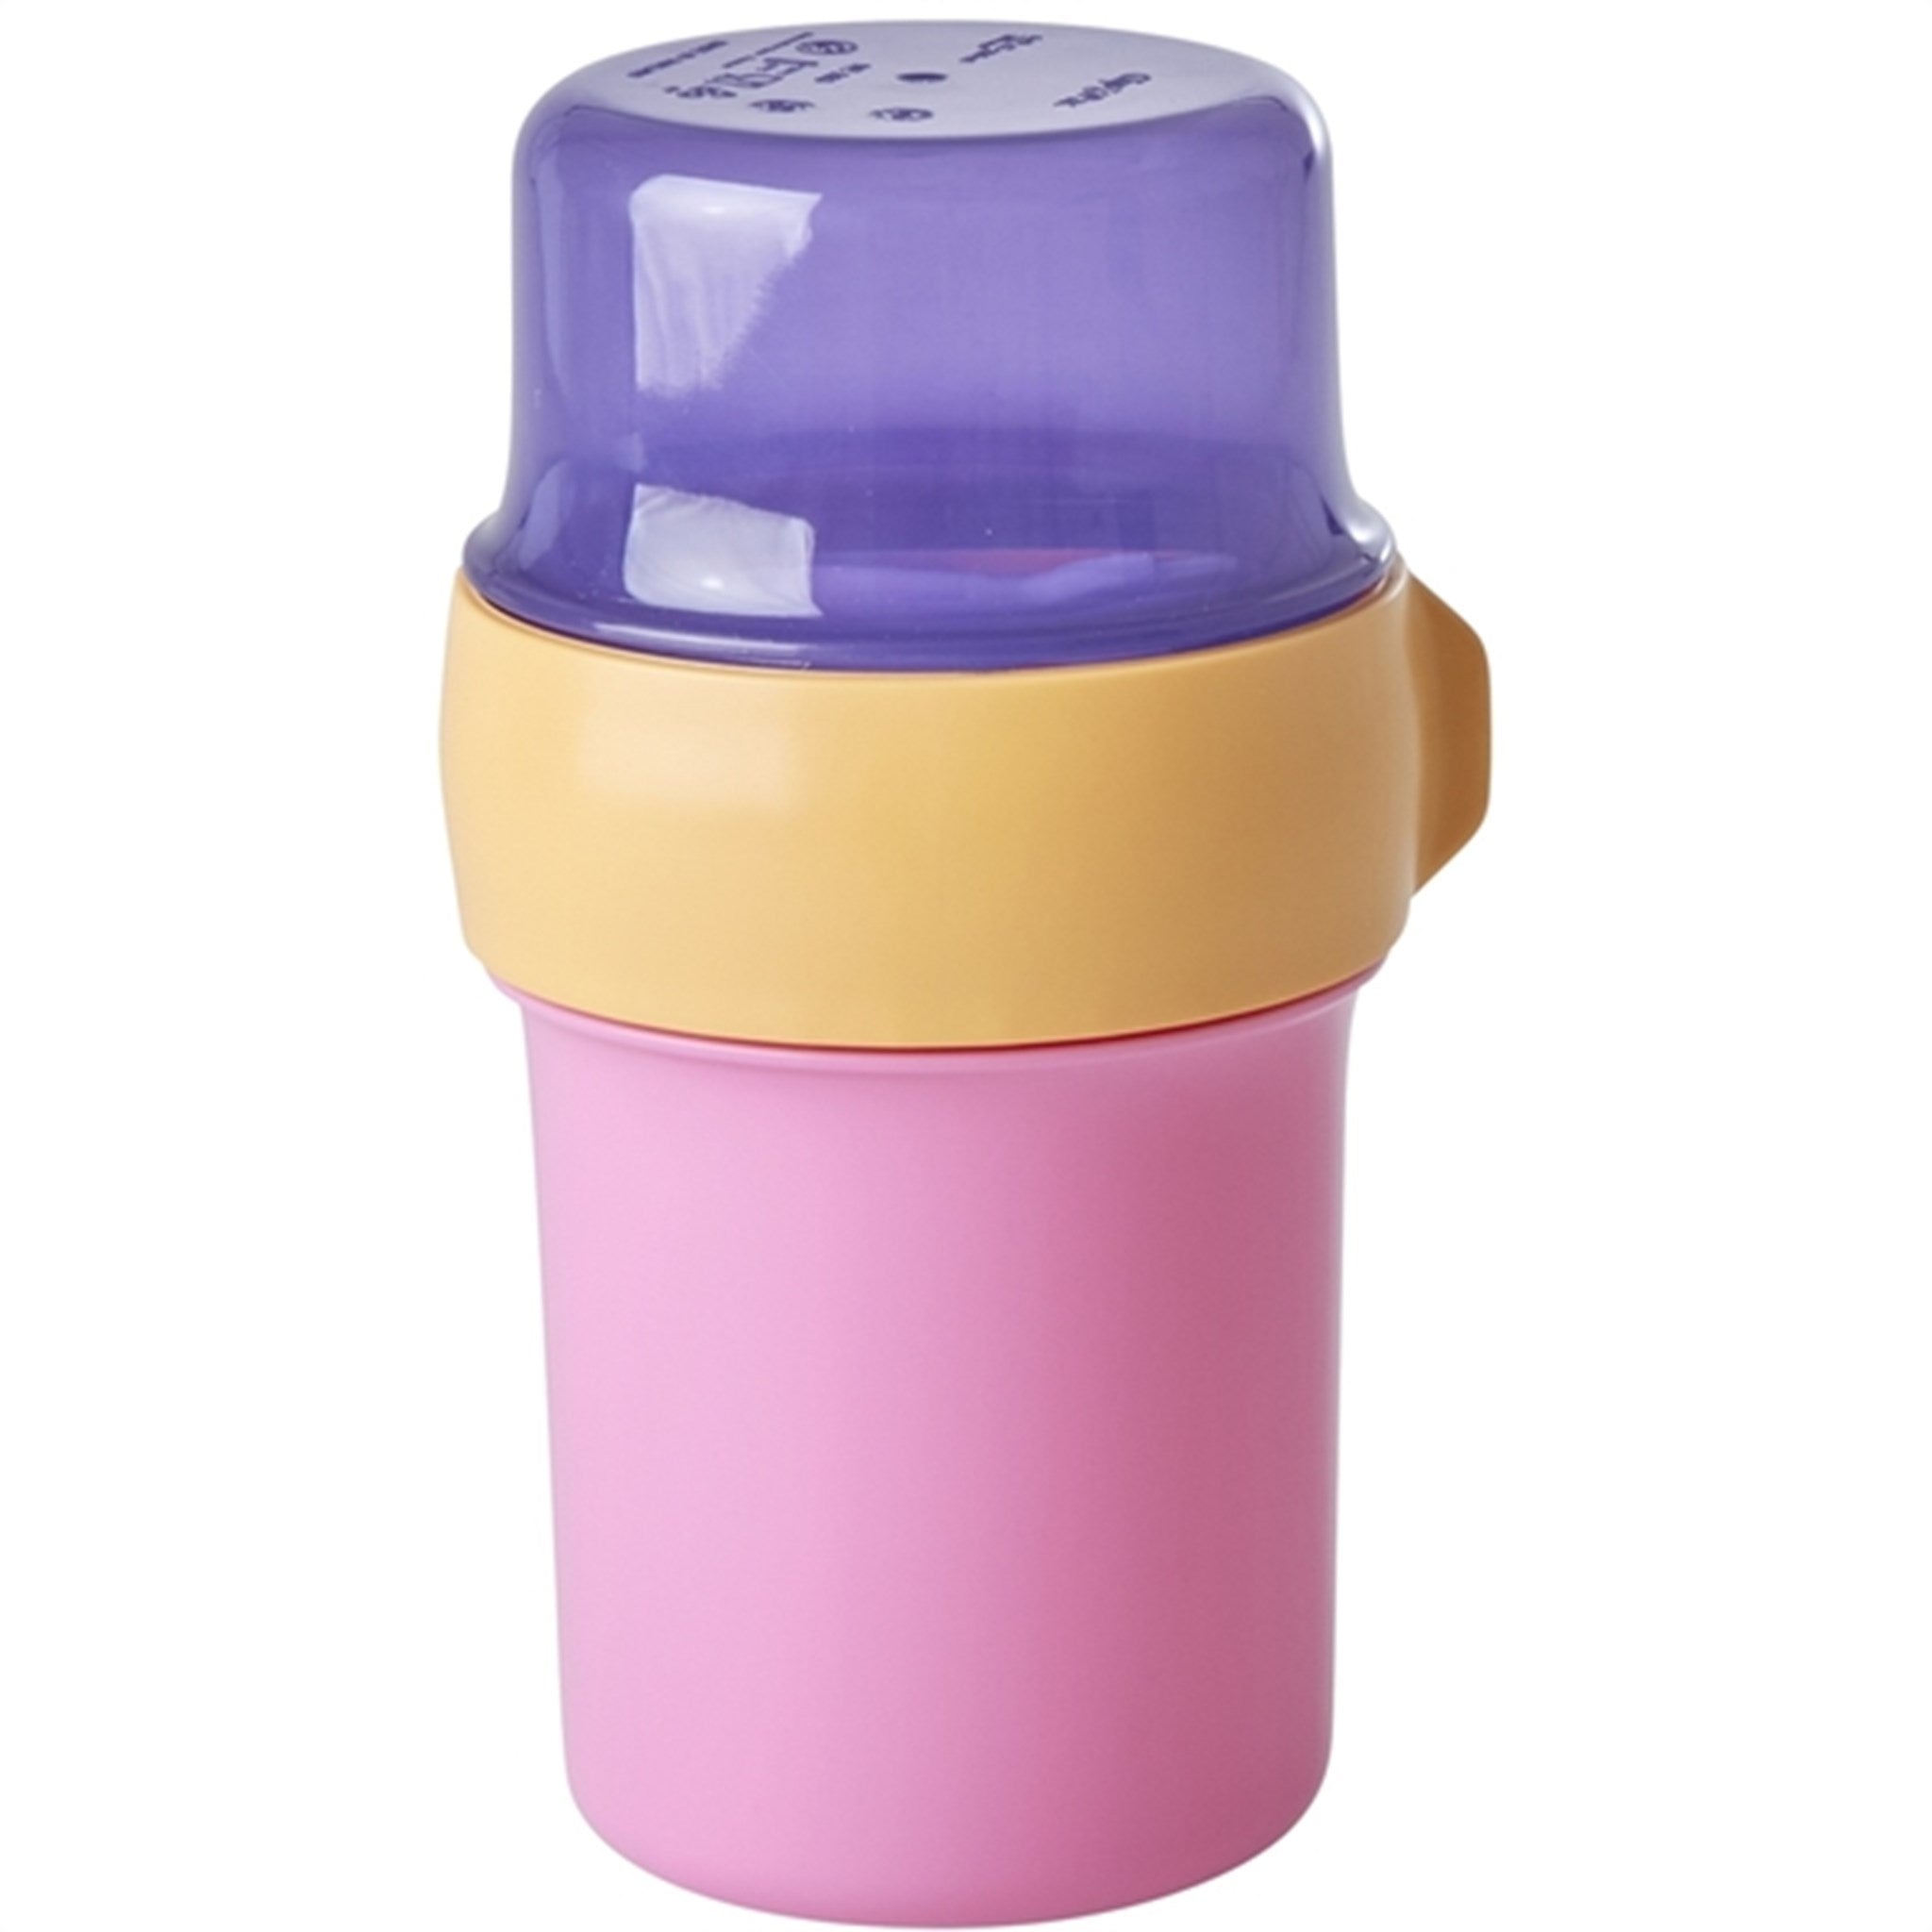 RICE Soft Pink To-Go Granola Container